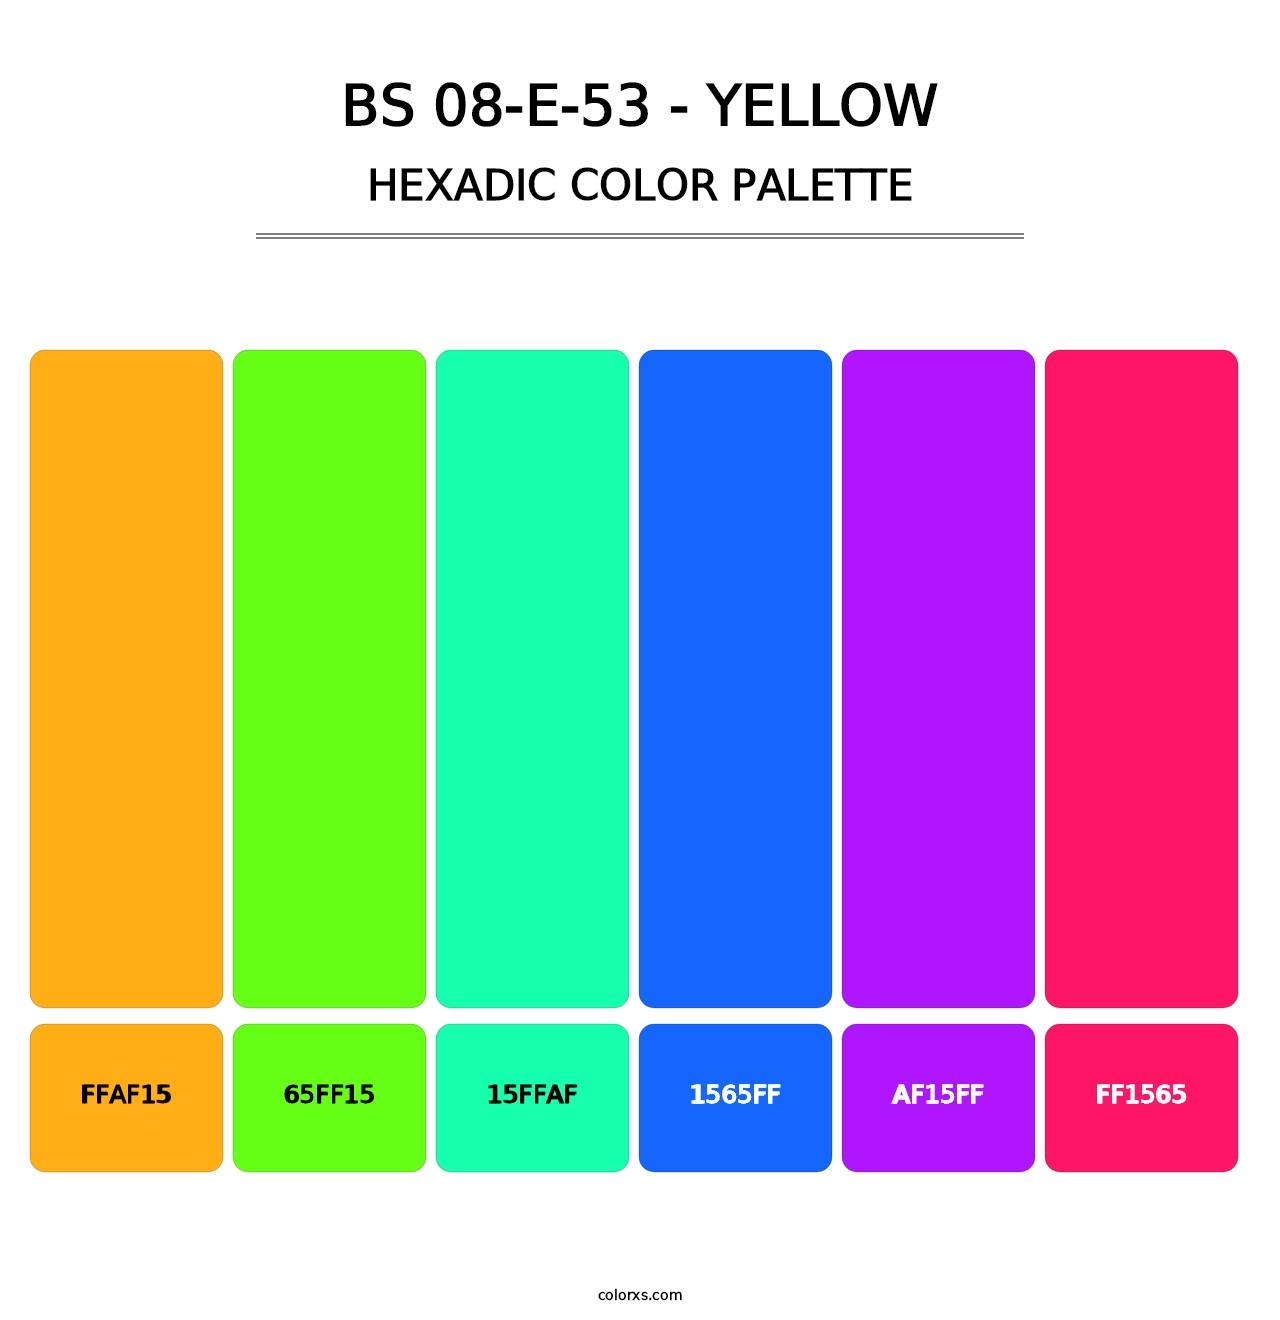 BS 08-E-53 - Yellow - Hexadic Color Palette